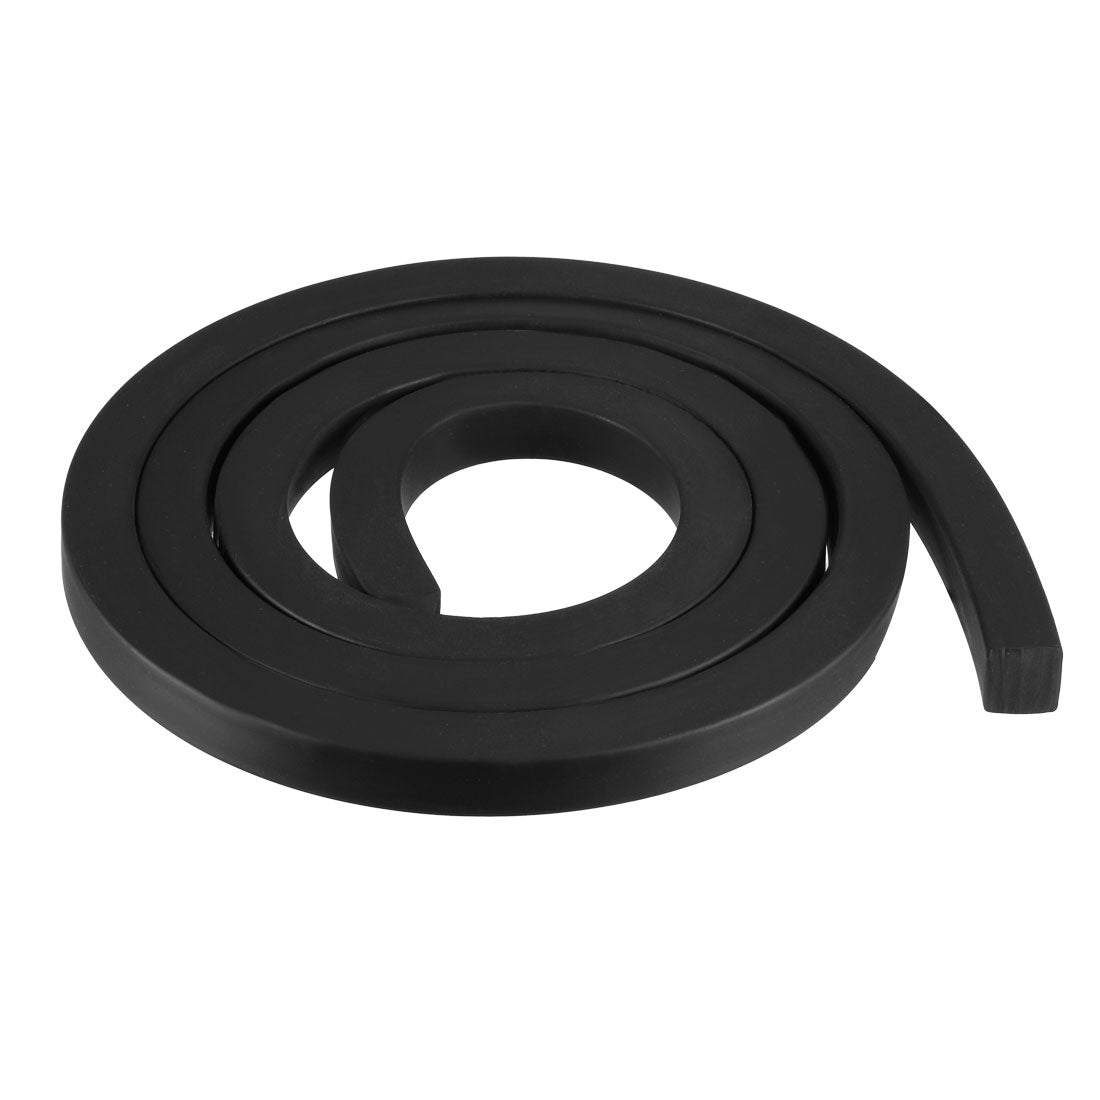 uxcell Uxcell Solid Rectangle Rubber Seal Strip 10mm Wide 10mm Thick, 1 Meter Long Black